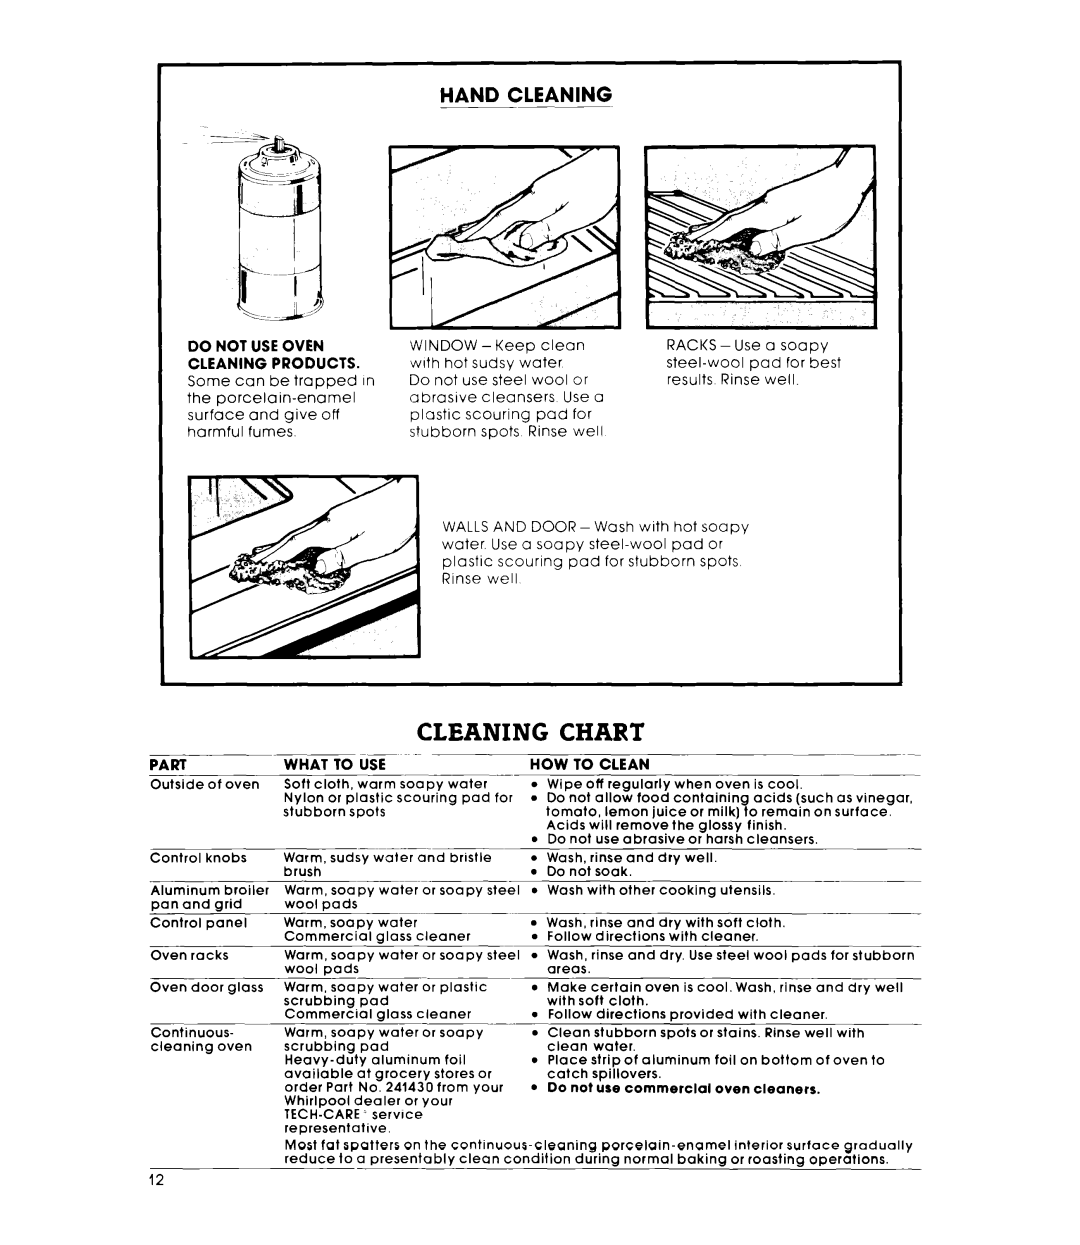 Whirlpool R82200XK, RB220PXK warranty Cleaning Chart, Hand Cleaning 